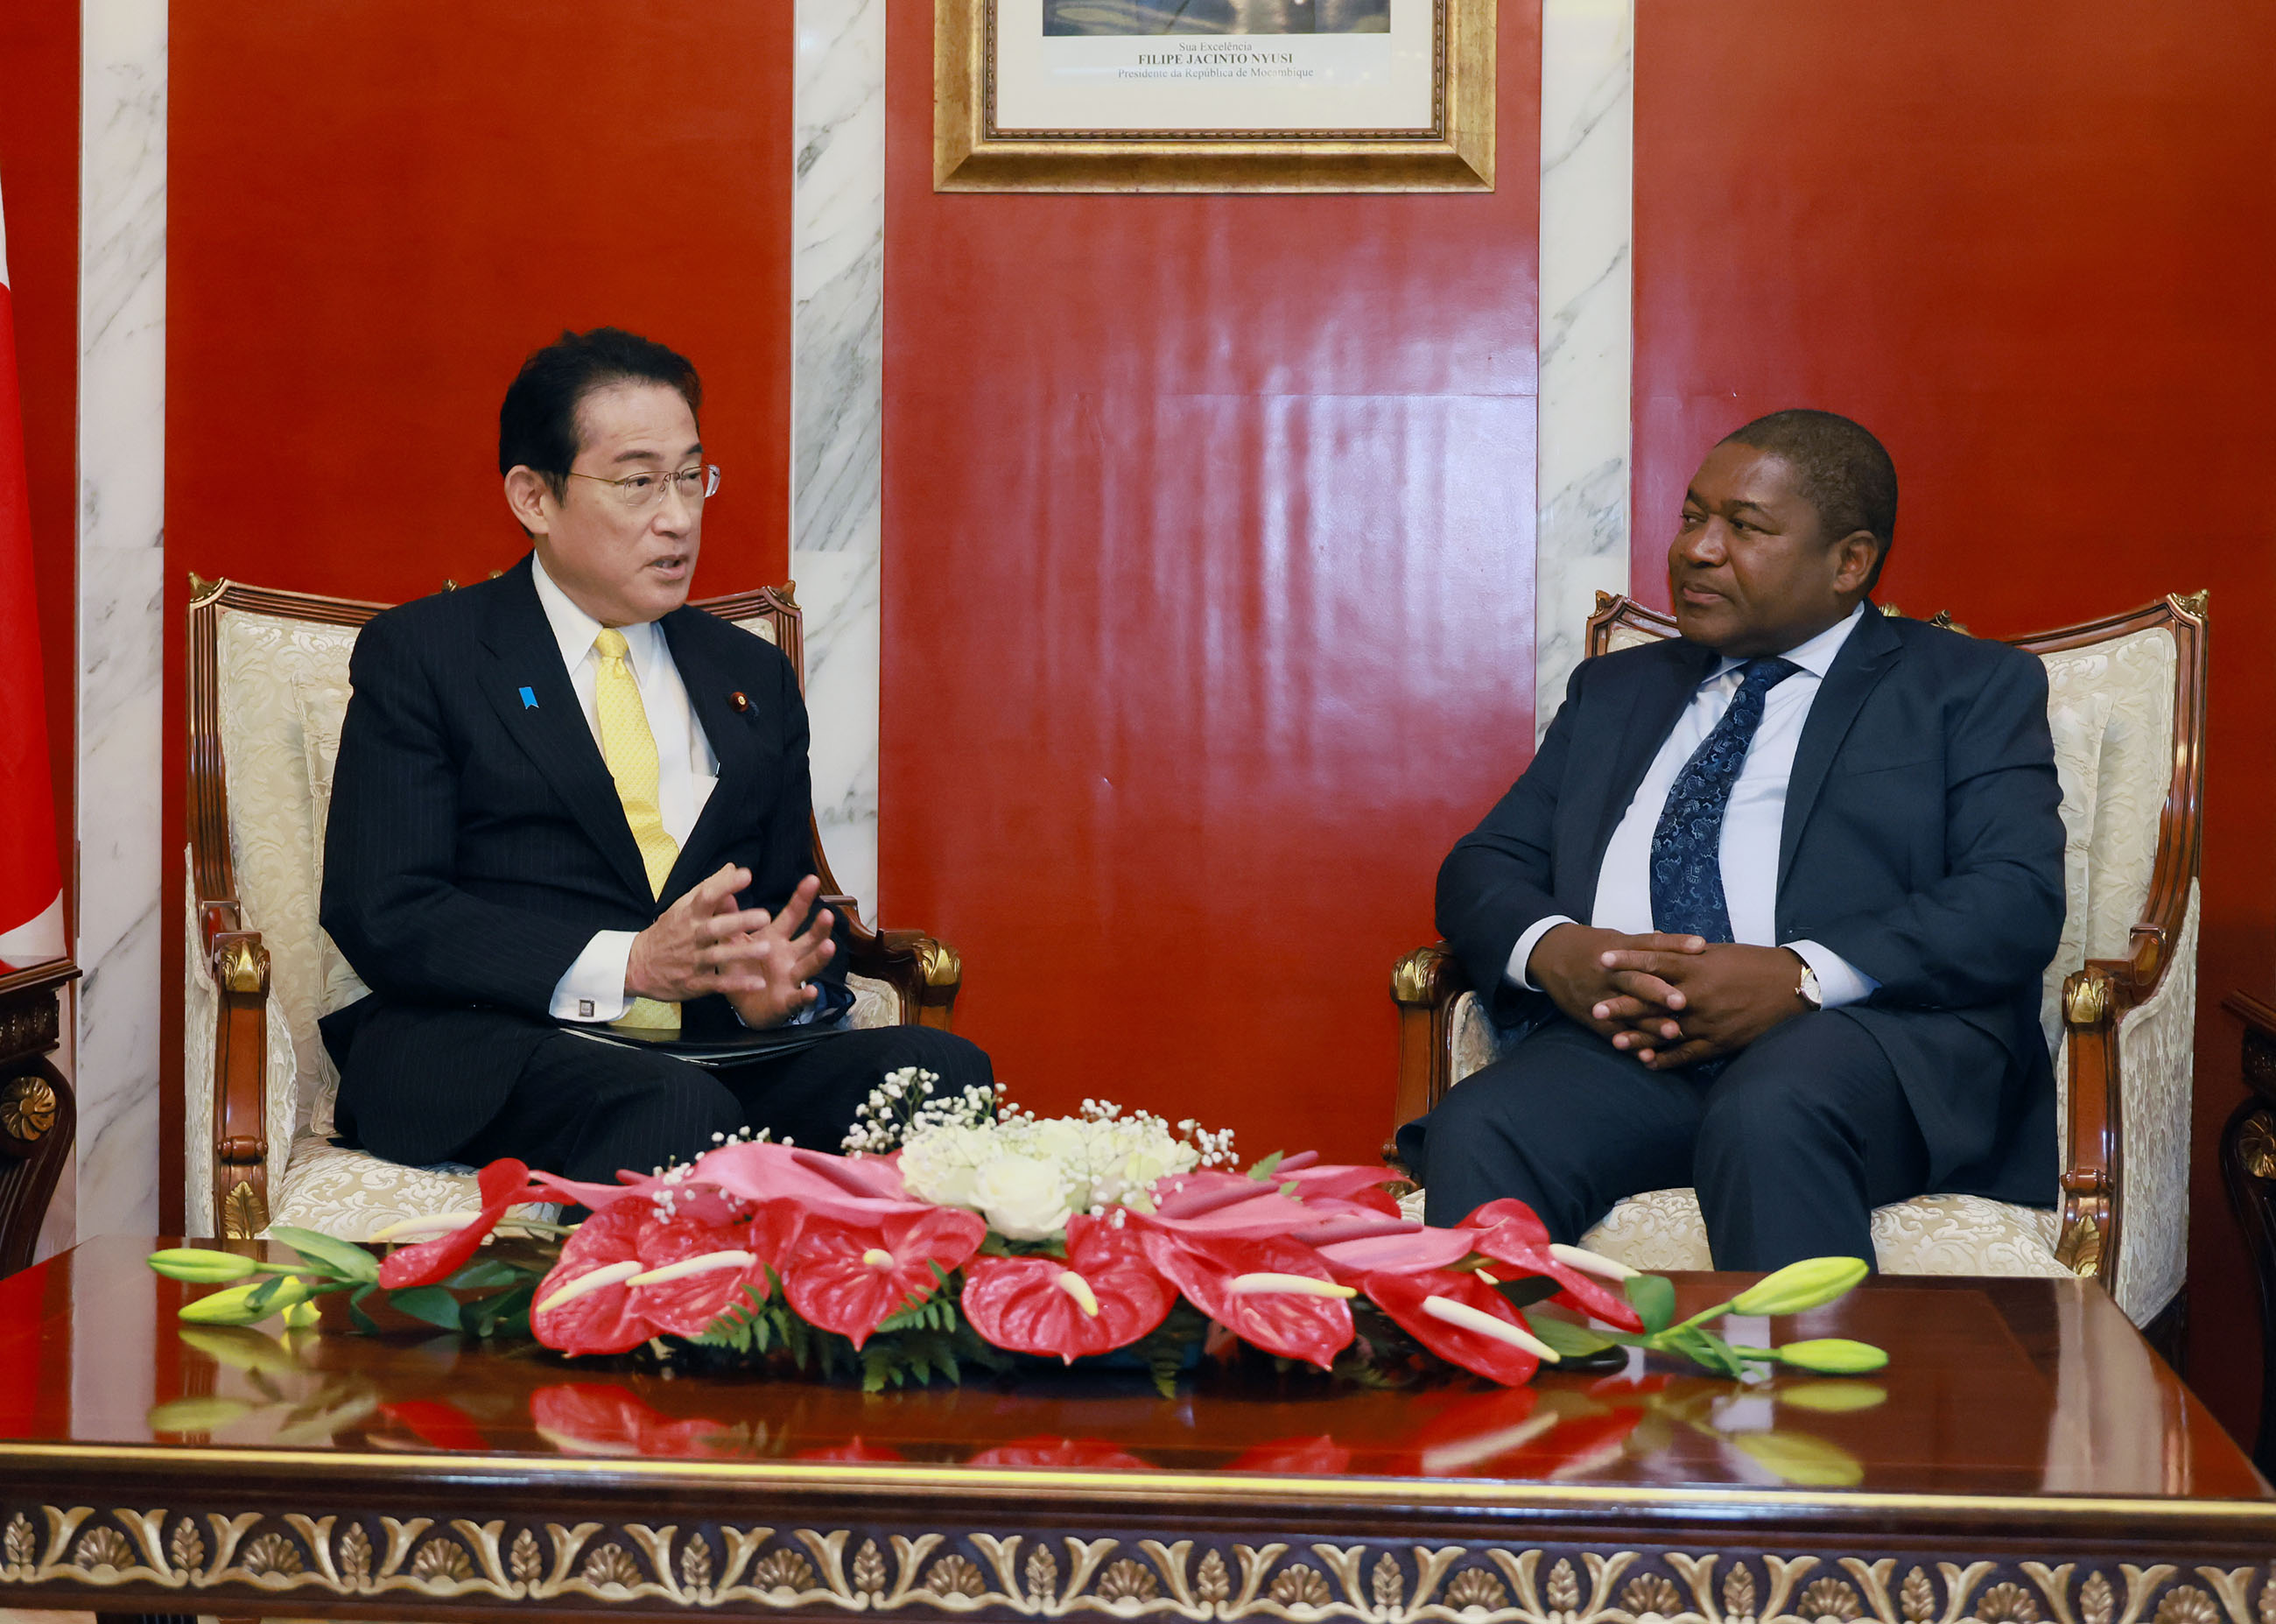 Japan-Mozambique Summit Meeting (2)